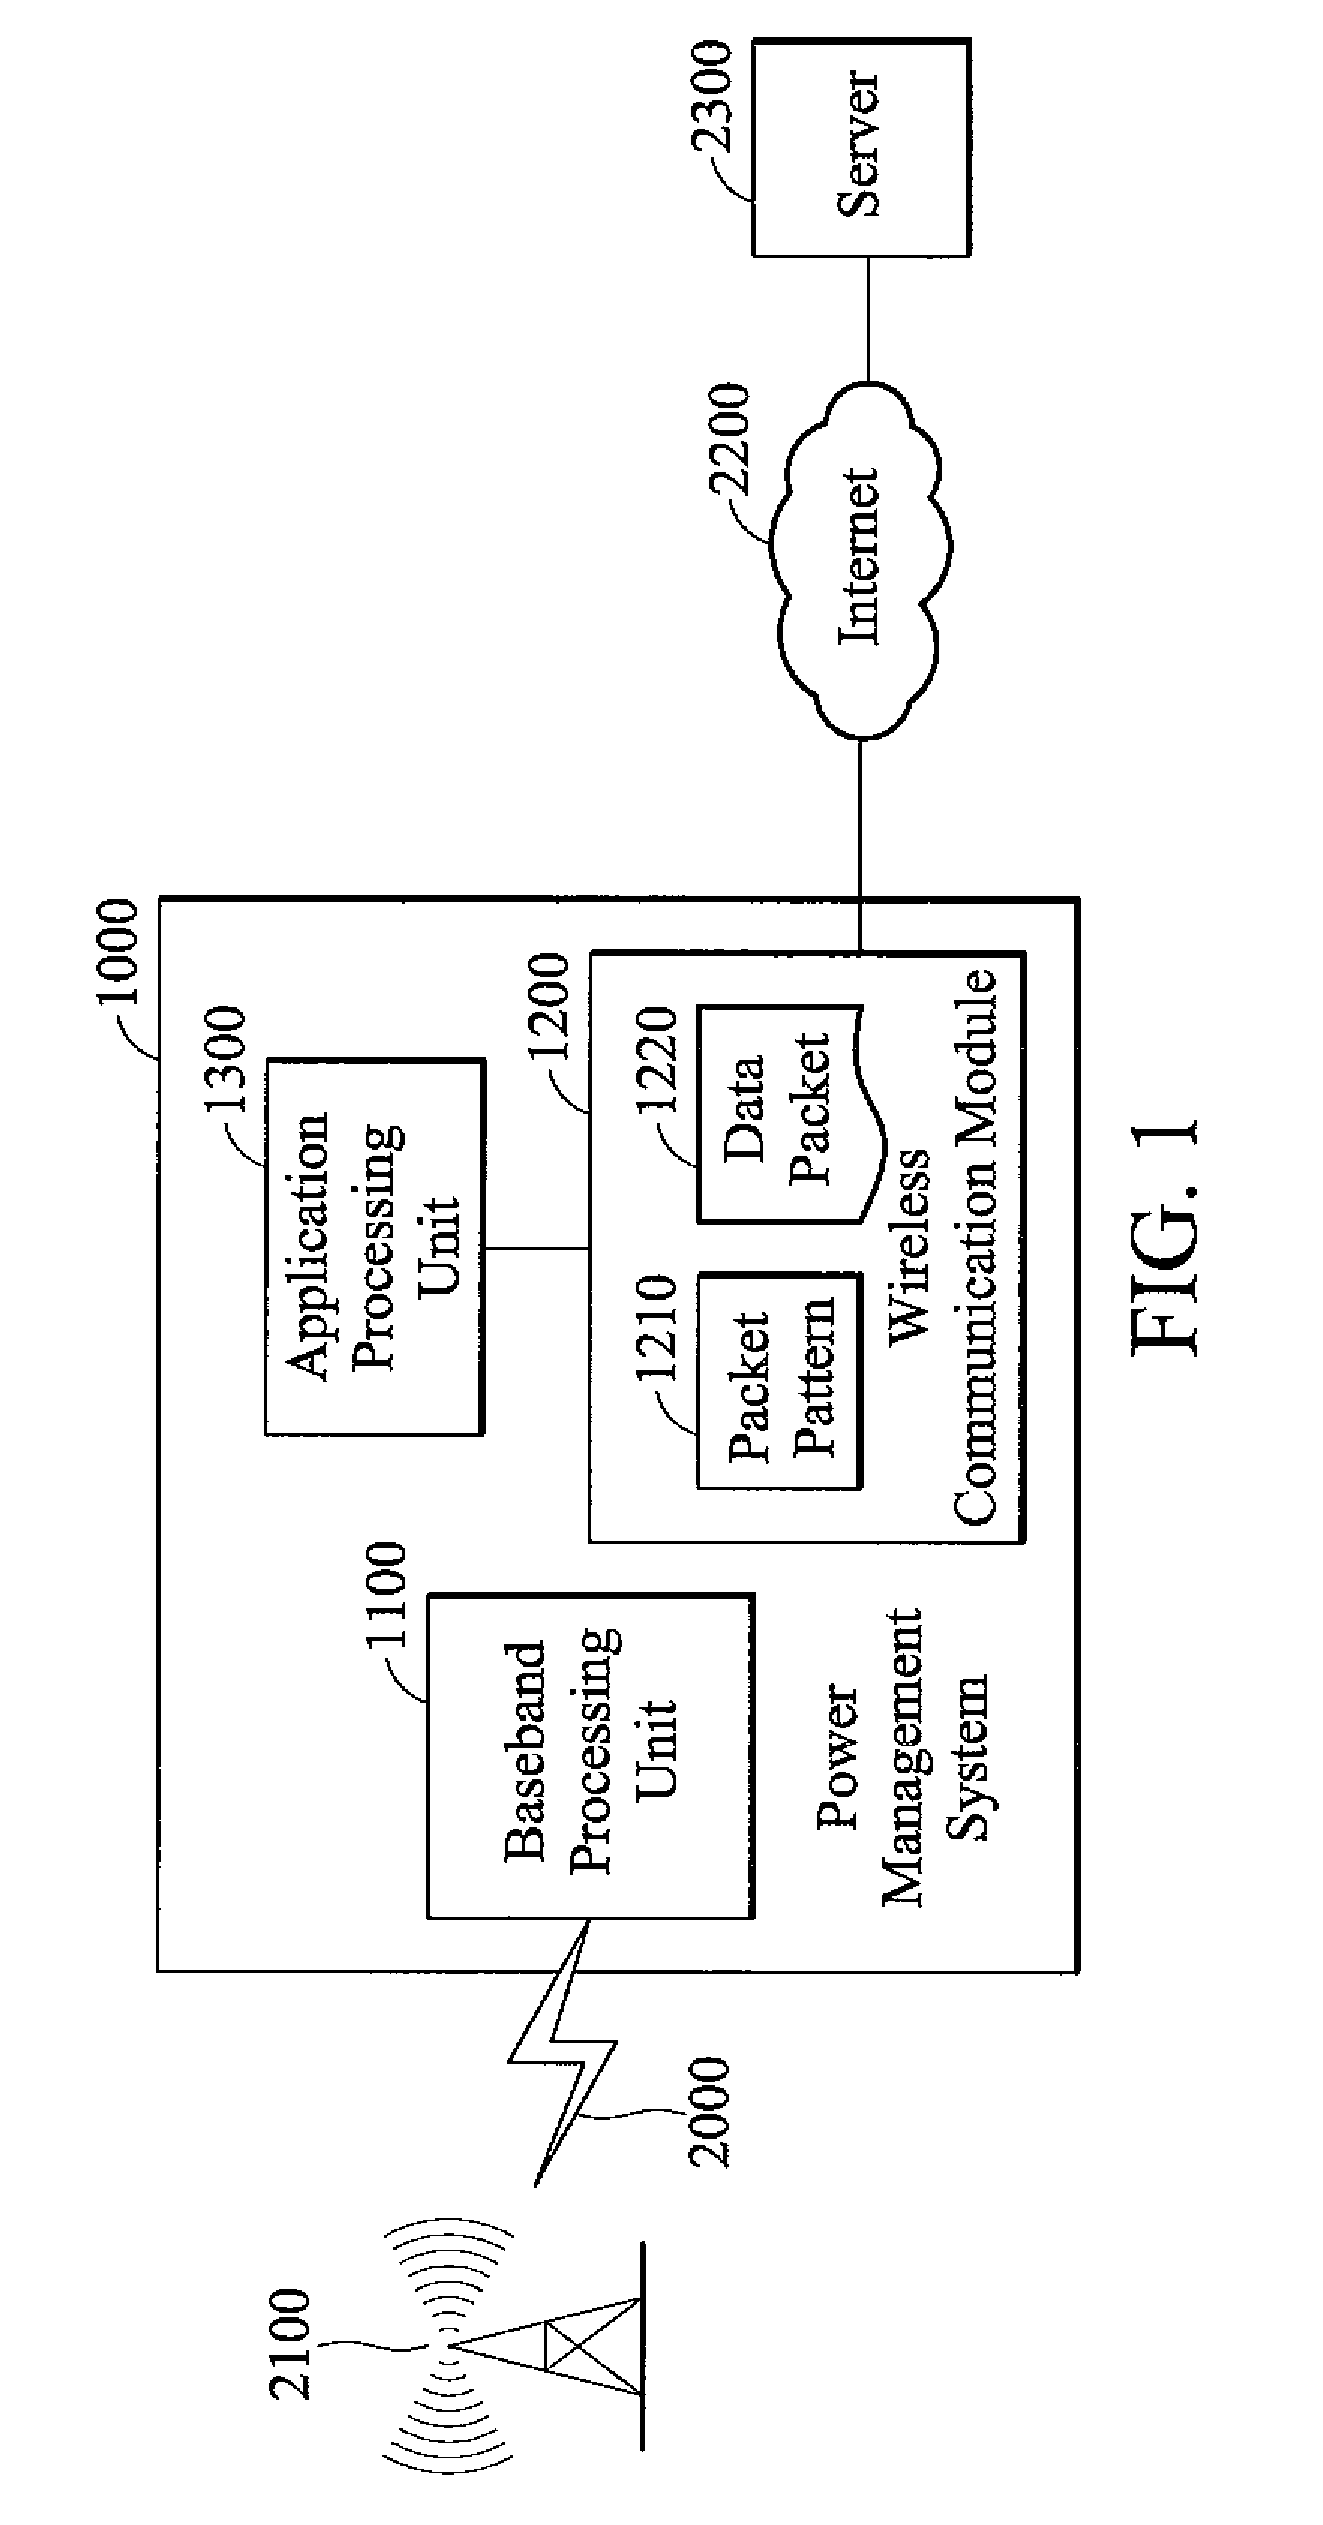 Power management systems and methods for electronic devices